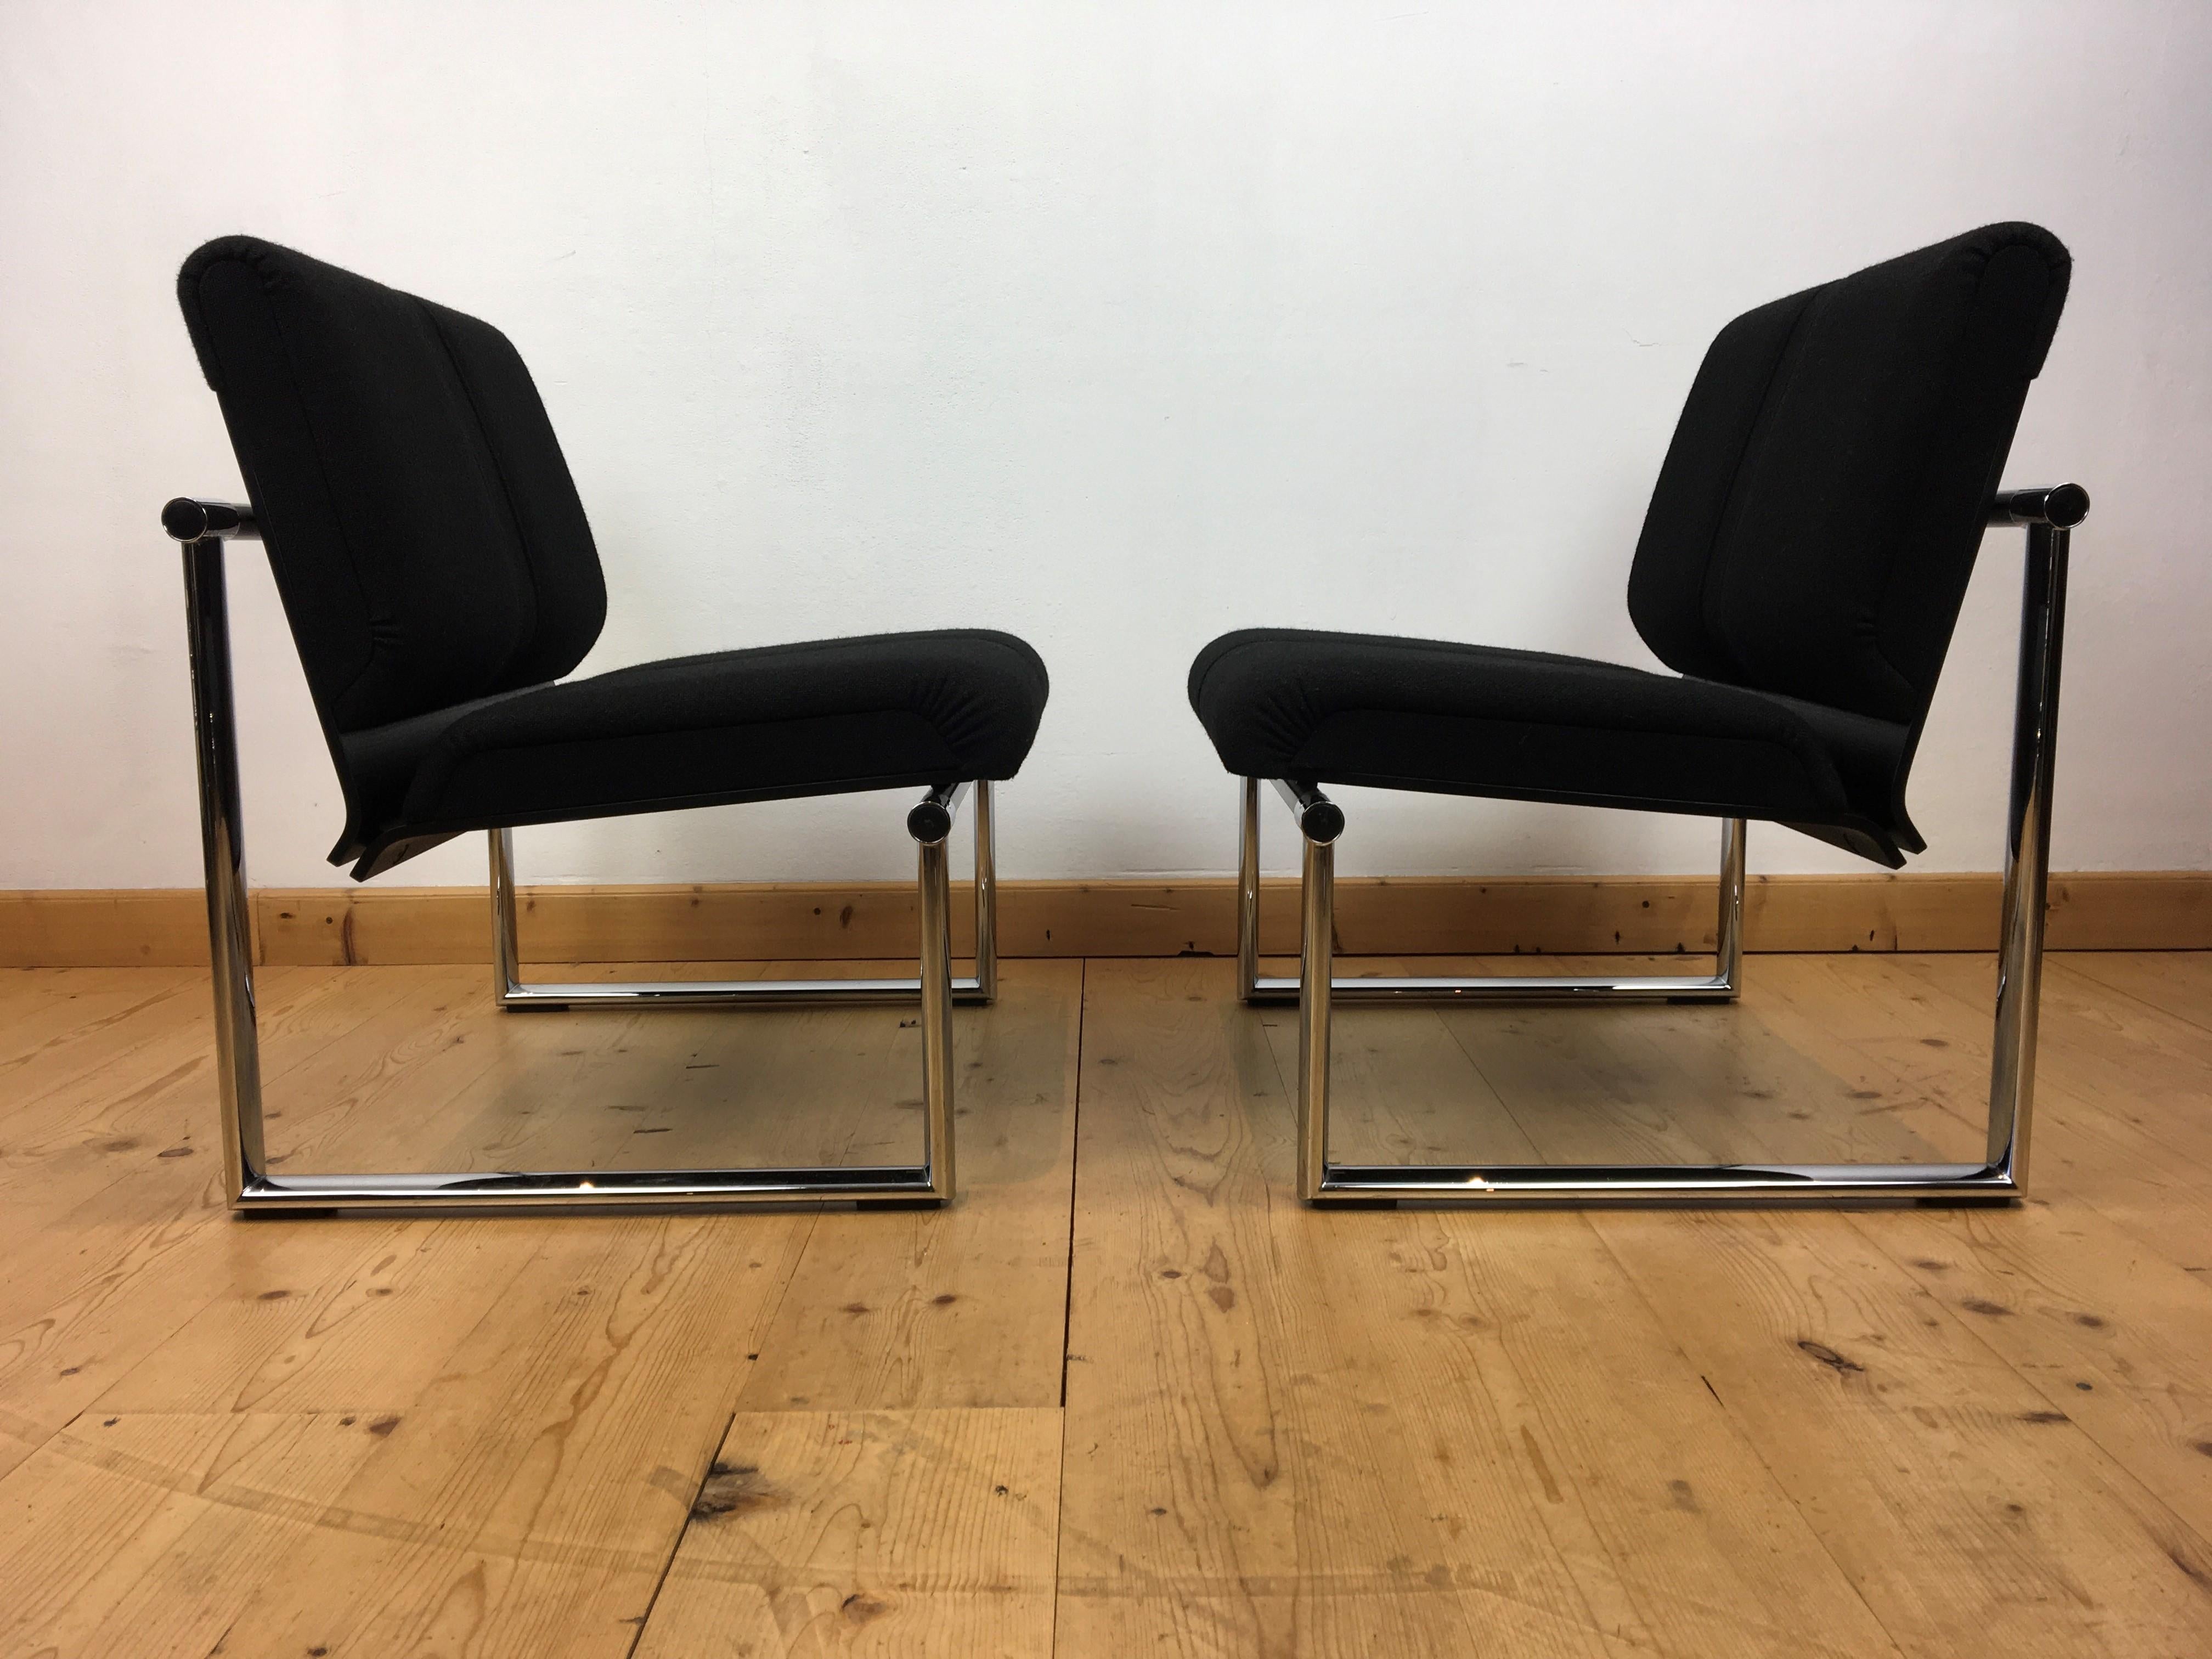 Set of 2 vintage design armchairs by Albert Stohl for GIROFLEX AG. 
These club chairs date circa 1980s - 1990s.
Both with original labels.

This large good quality armchairs have a chromed metal frame with black fabric seating with a seam in the